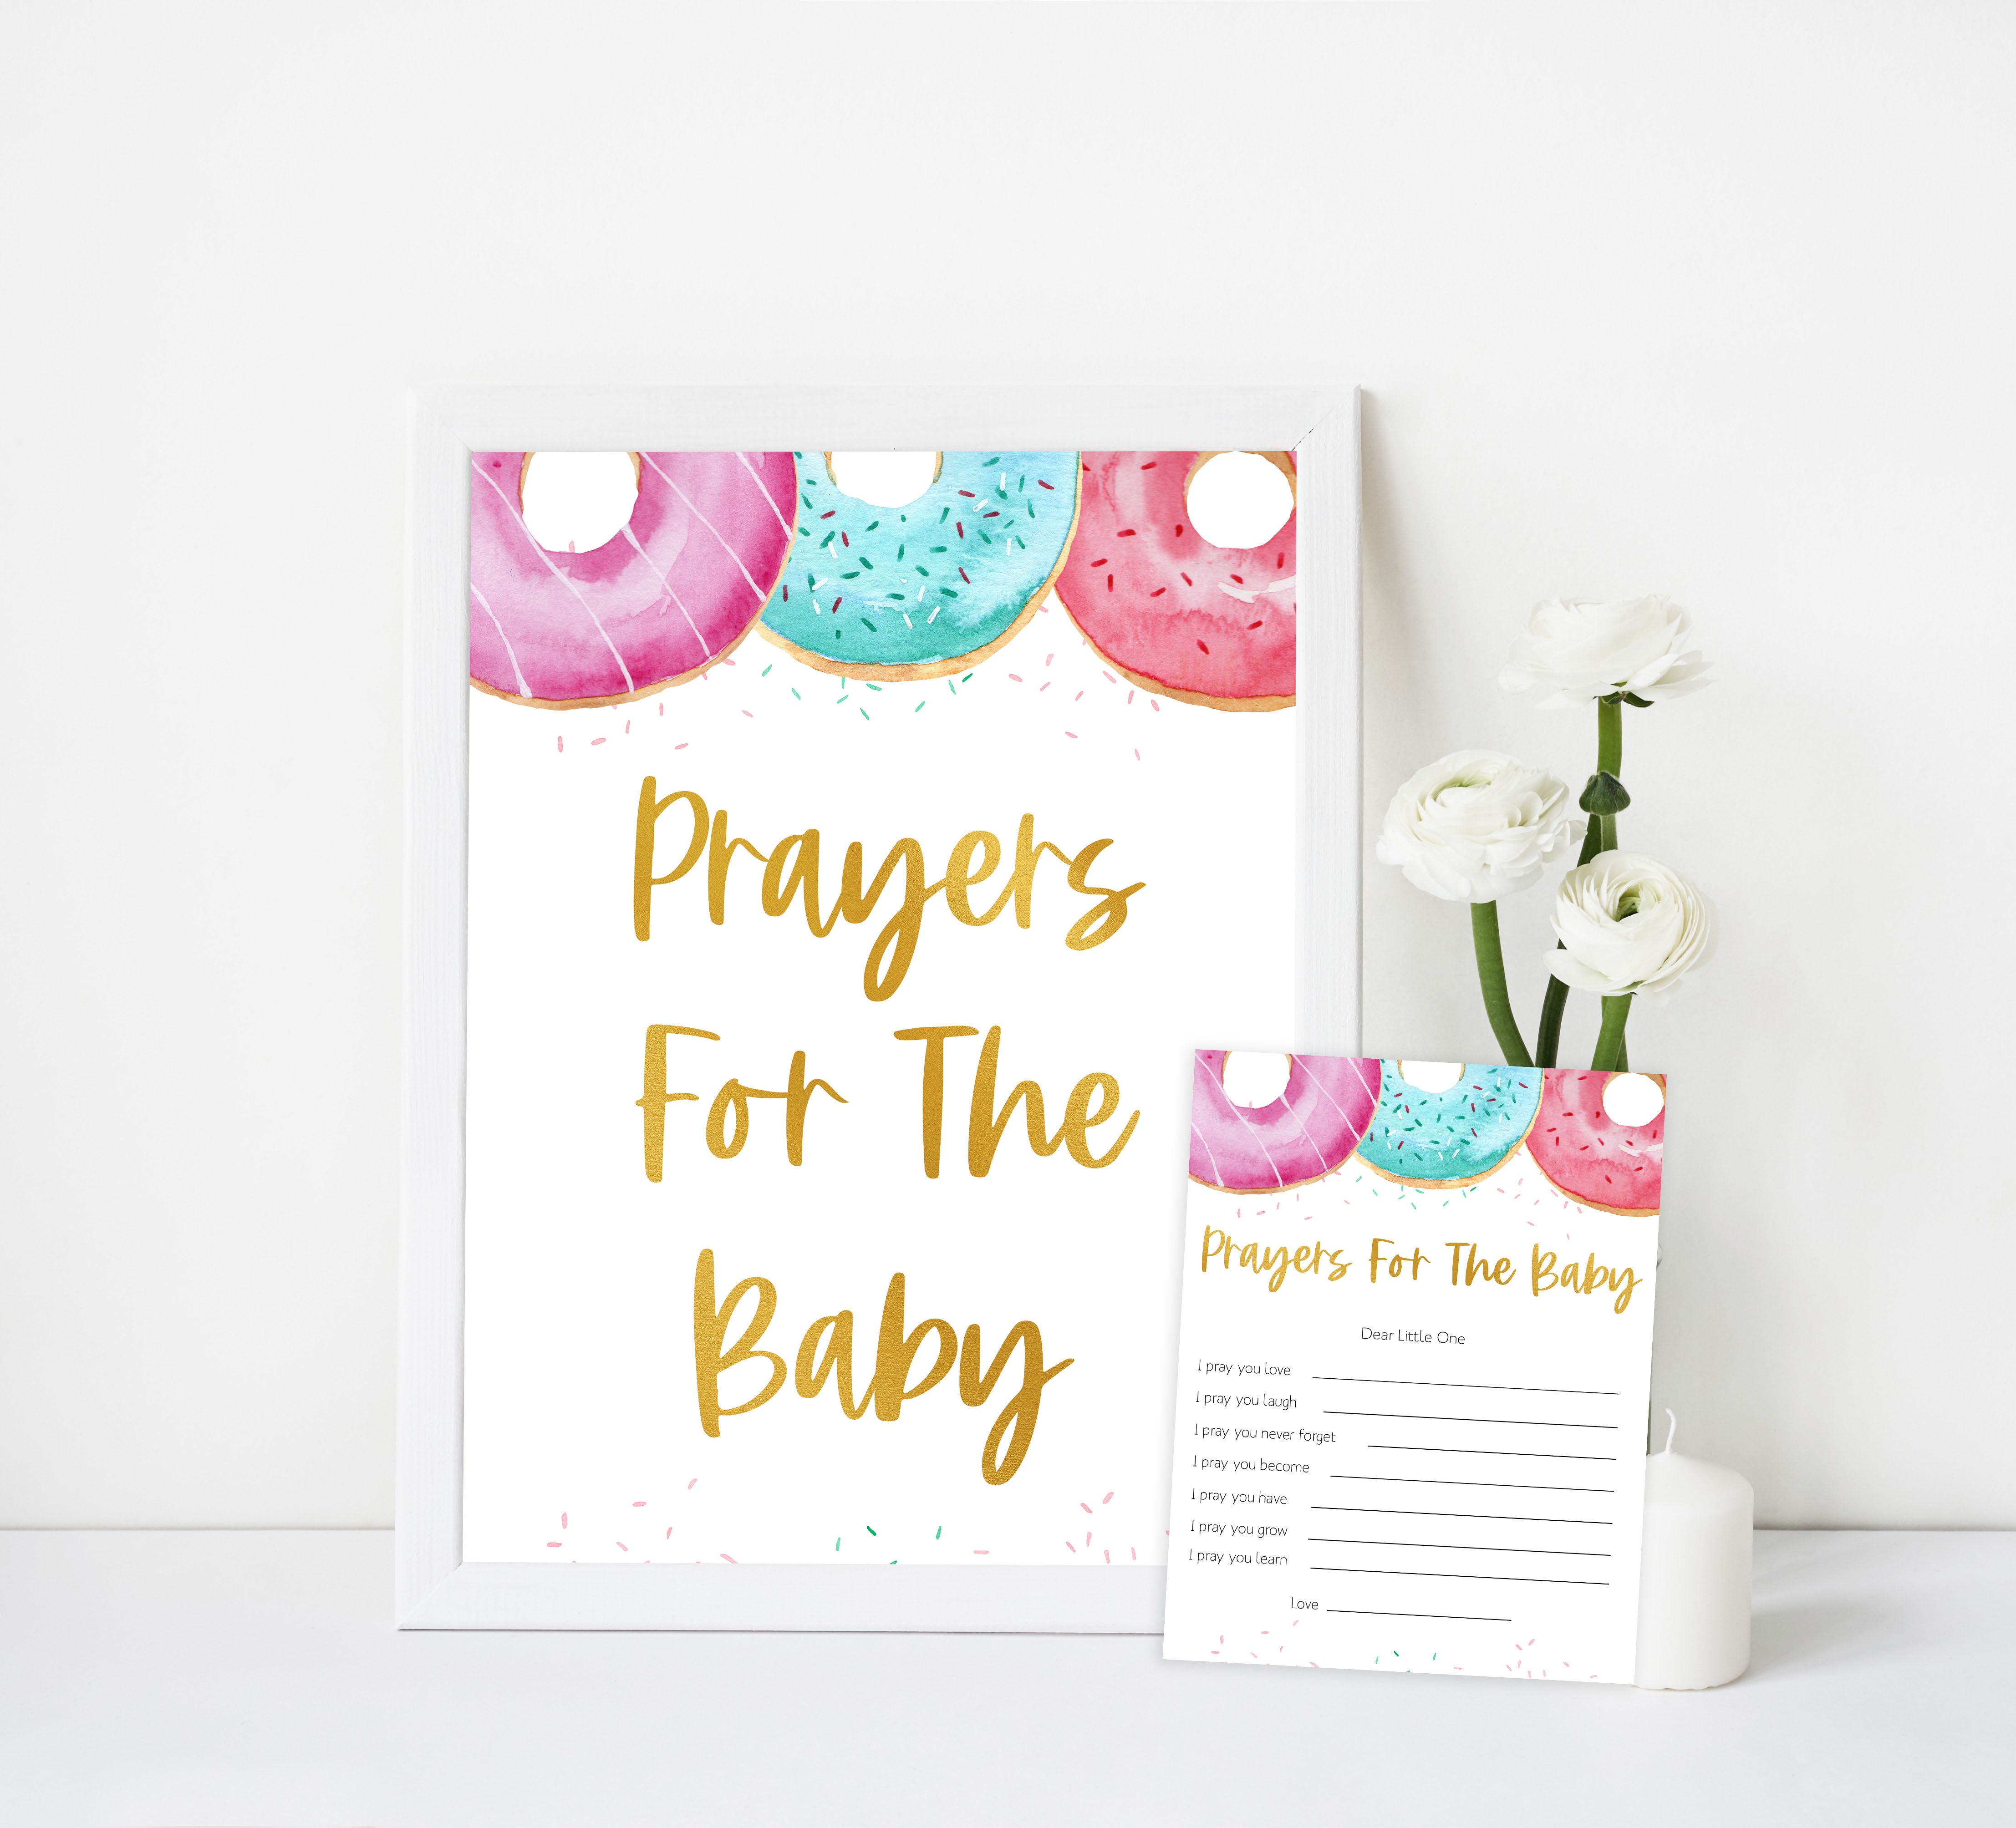 prayers for the baby game, Printable baby shower games, donut baby games, baby shower games, fun baby shower ideas, top baby shower ideas, donut sprinkles baby shower, baby shower games, fun donut baby shower ideas